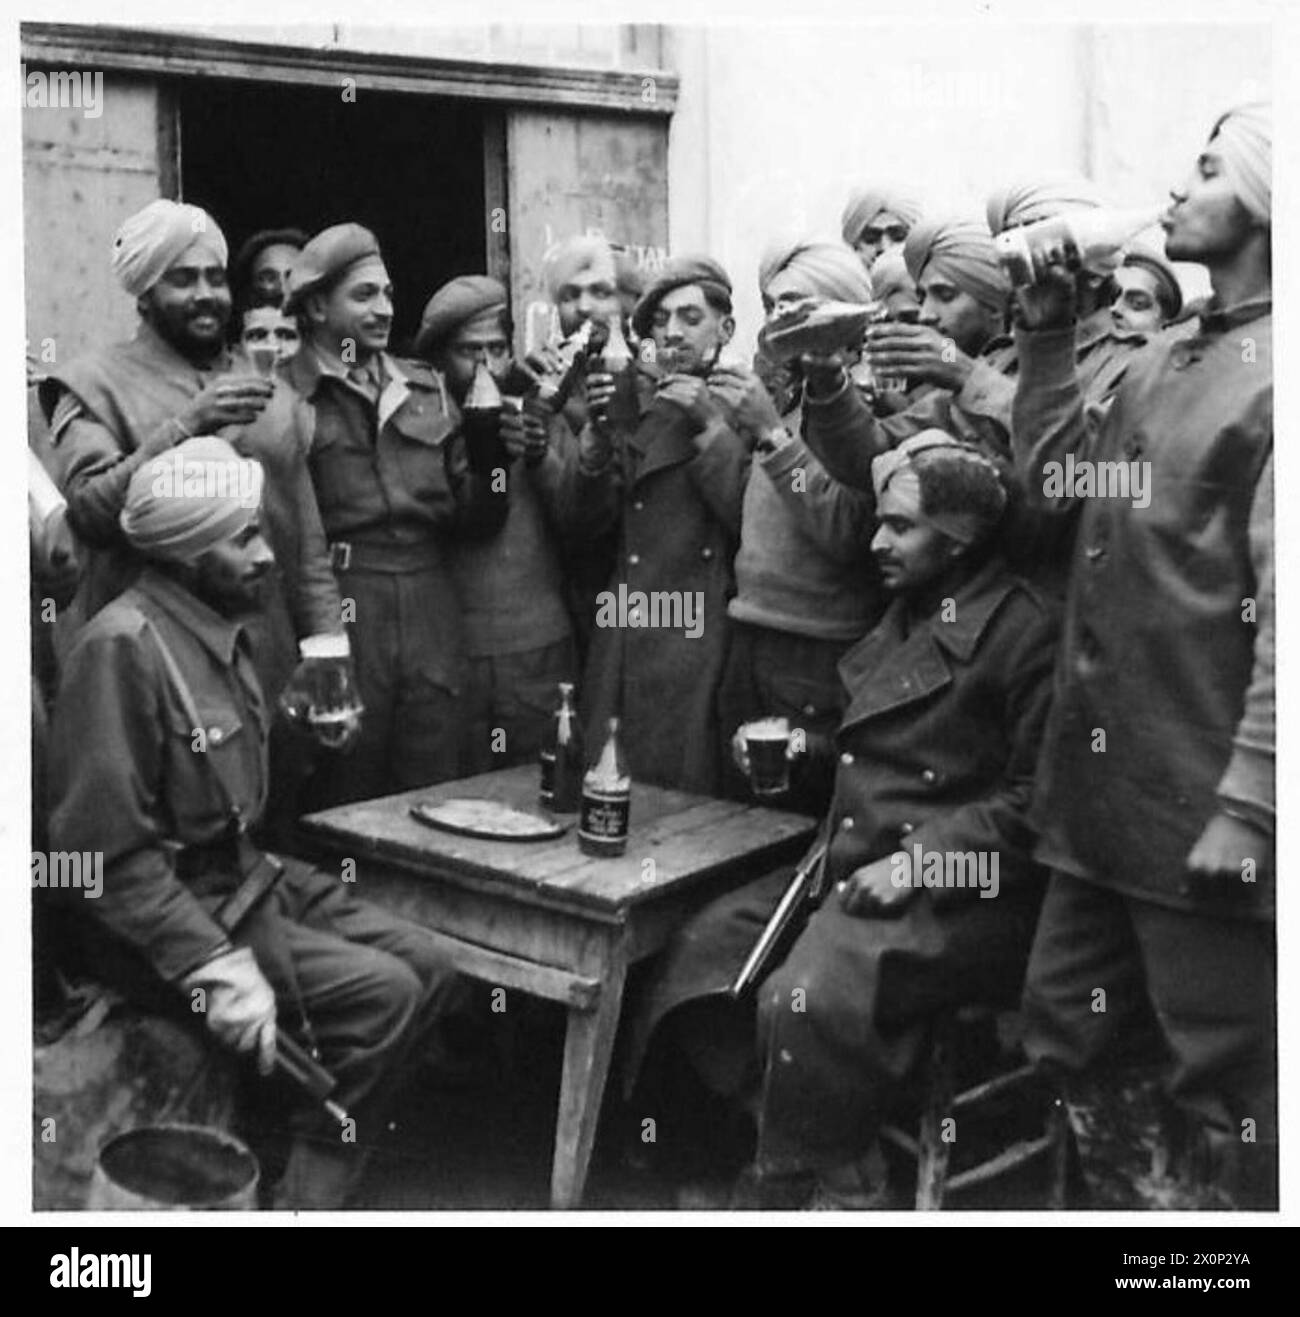 EIGHTH ARMY : VARIOUS - Men of 1/2 Punjab Btn., 10th Indian Division at a toasting party. The Indian Captain QM has wished all present a Happy Christmas, and then joined in a glass of beer. Photographic negative , British Army Stock Photo